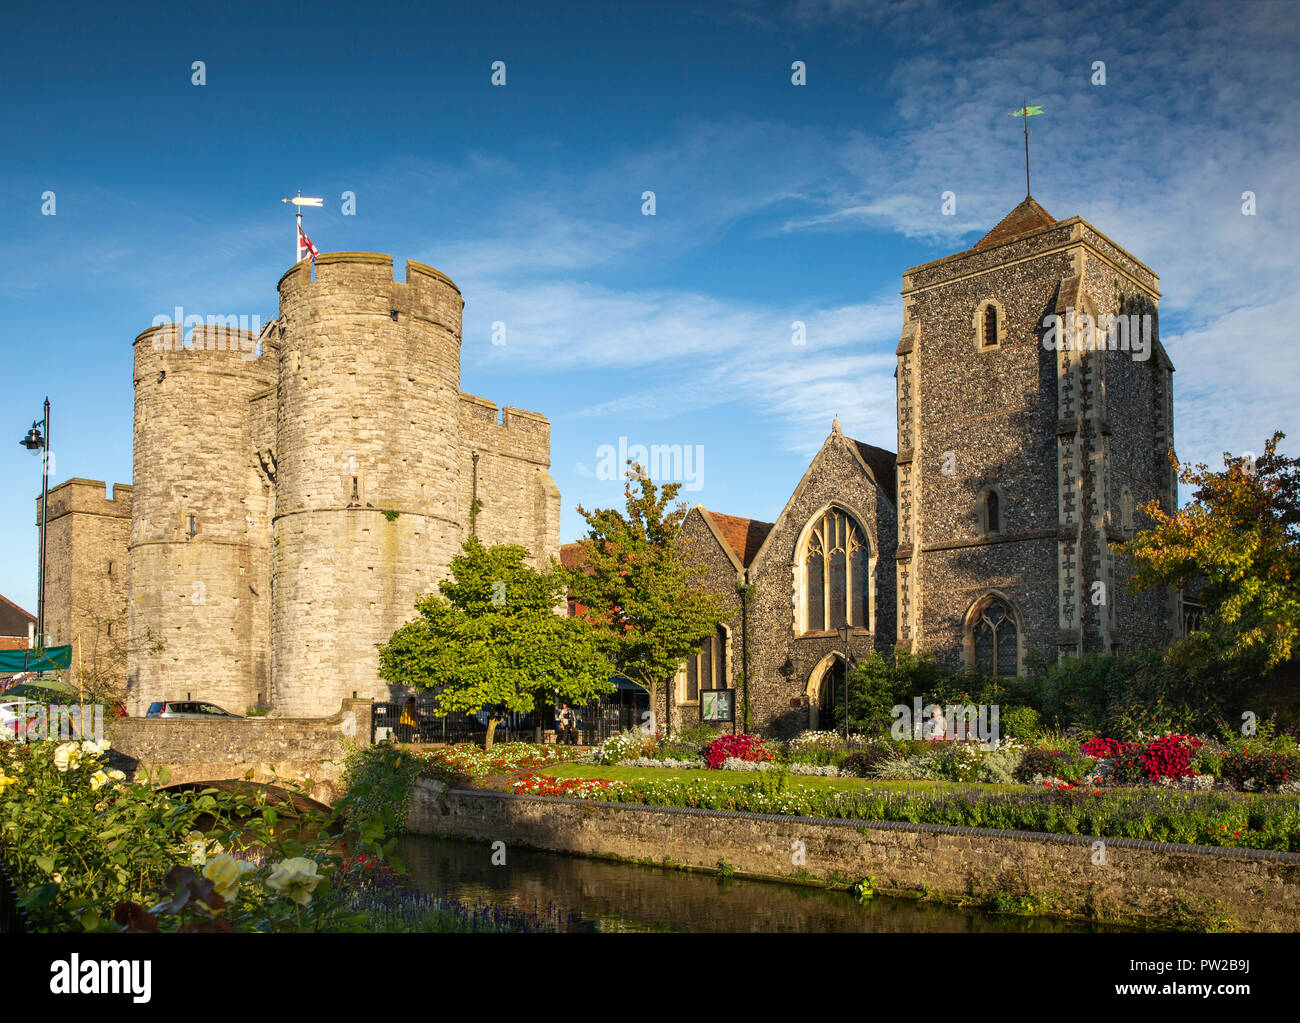 UK, Kent, Canterbury, North Lane, Westgate Towers, museum and viewpoint in old town wall by old Guildhall building beside Great Stour river Stock Photo